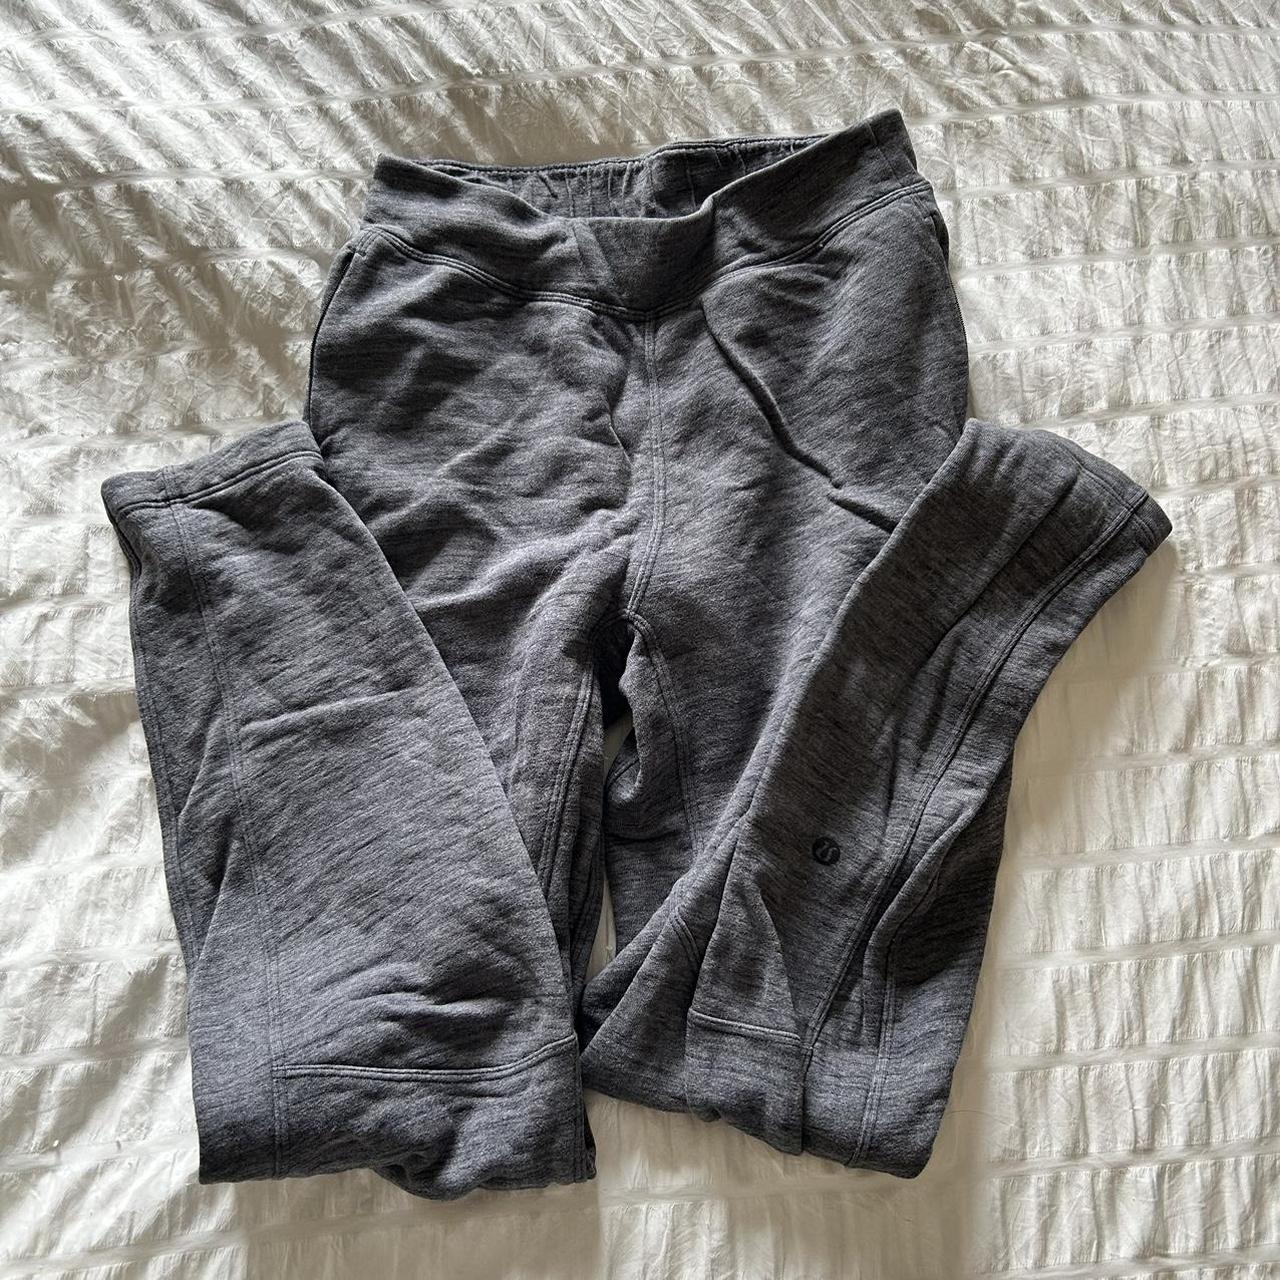 Lululemon joggers Great condition I just never wear - Depop